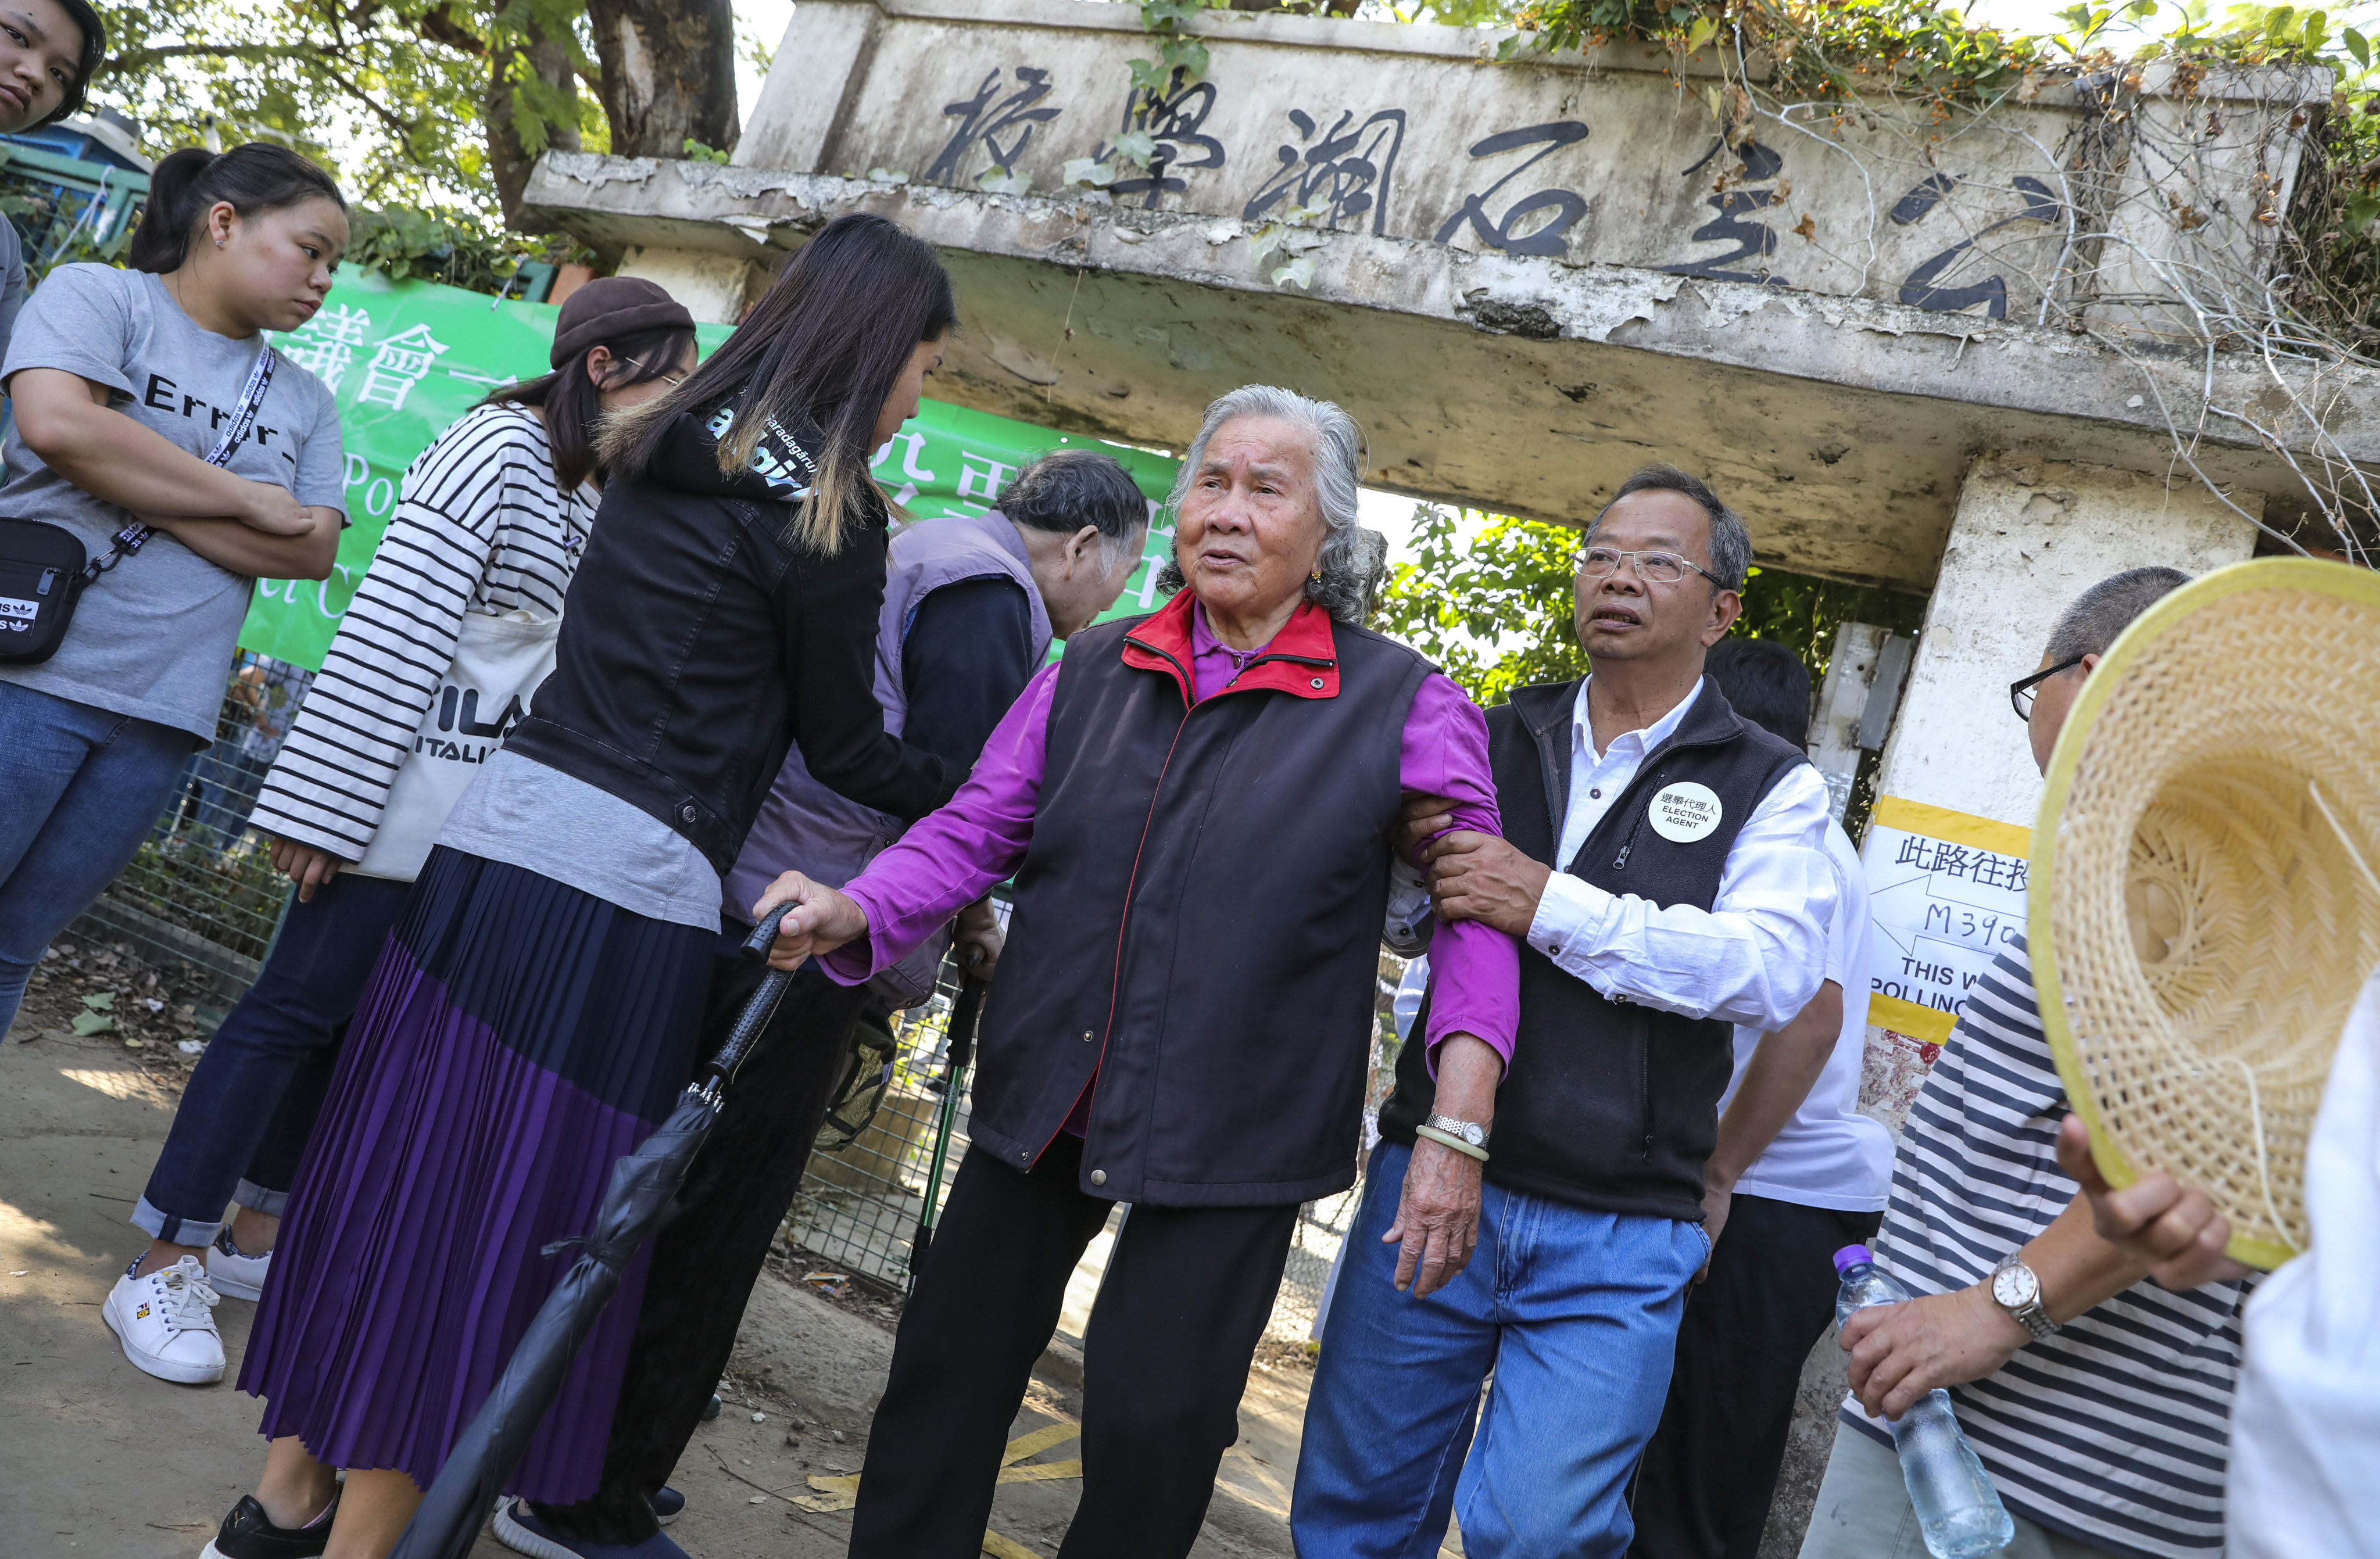 An elderly resident outside a polling station in 2019. Welfare sector lawmaker Tik Chi-yuen worries the new subsidy makes some operators of community centres for the elderly feel pressured to increase voter turnout. Photo: K. Y. Cheng